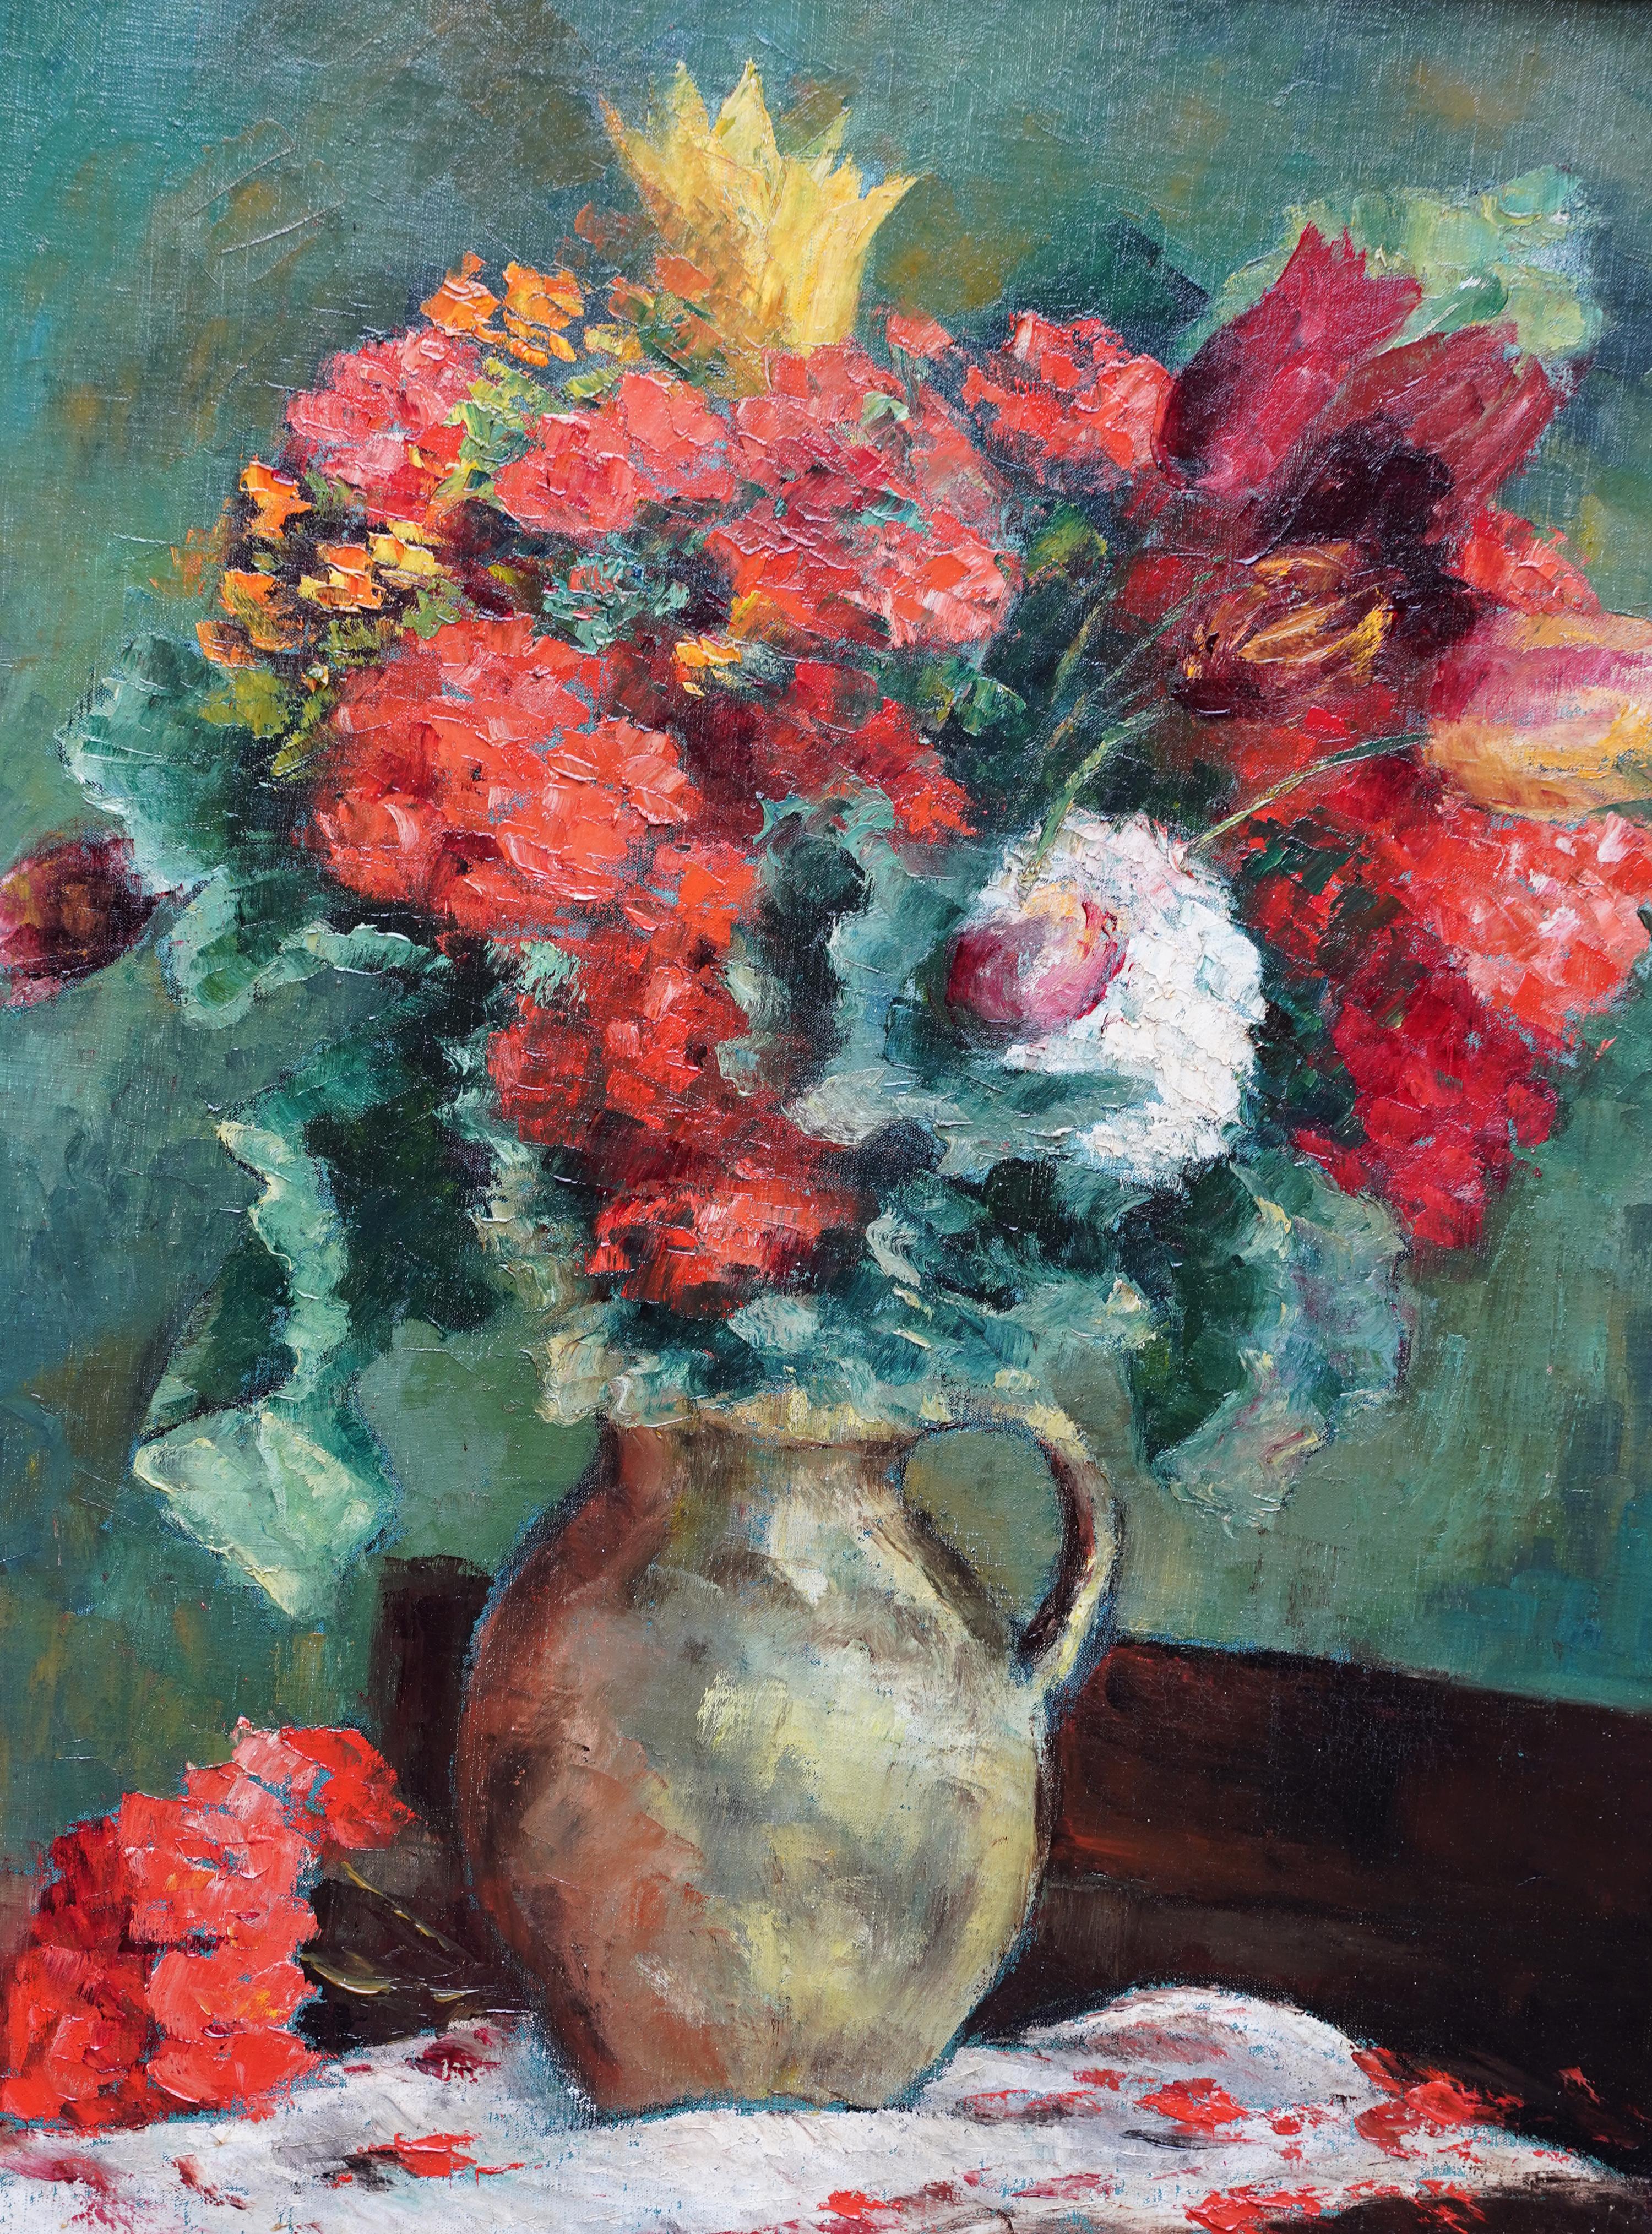 Still Life of Flowers in Jug - Post Impressionist 1940's art floral oil painting - Post-Impressionist Painting by Nadia Benois